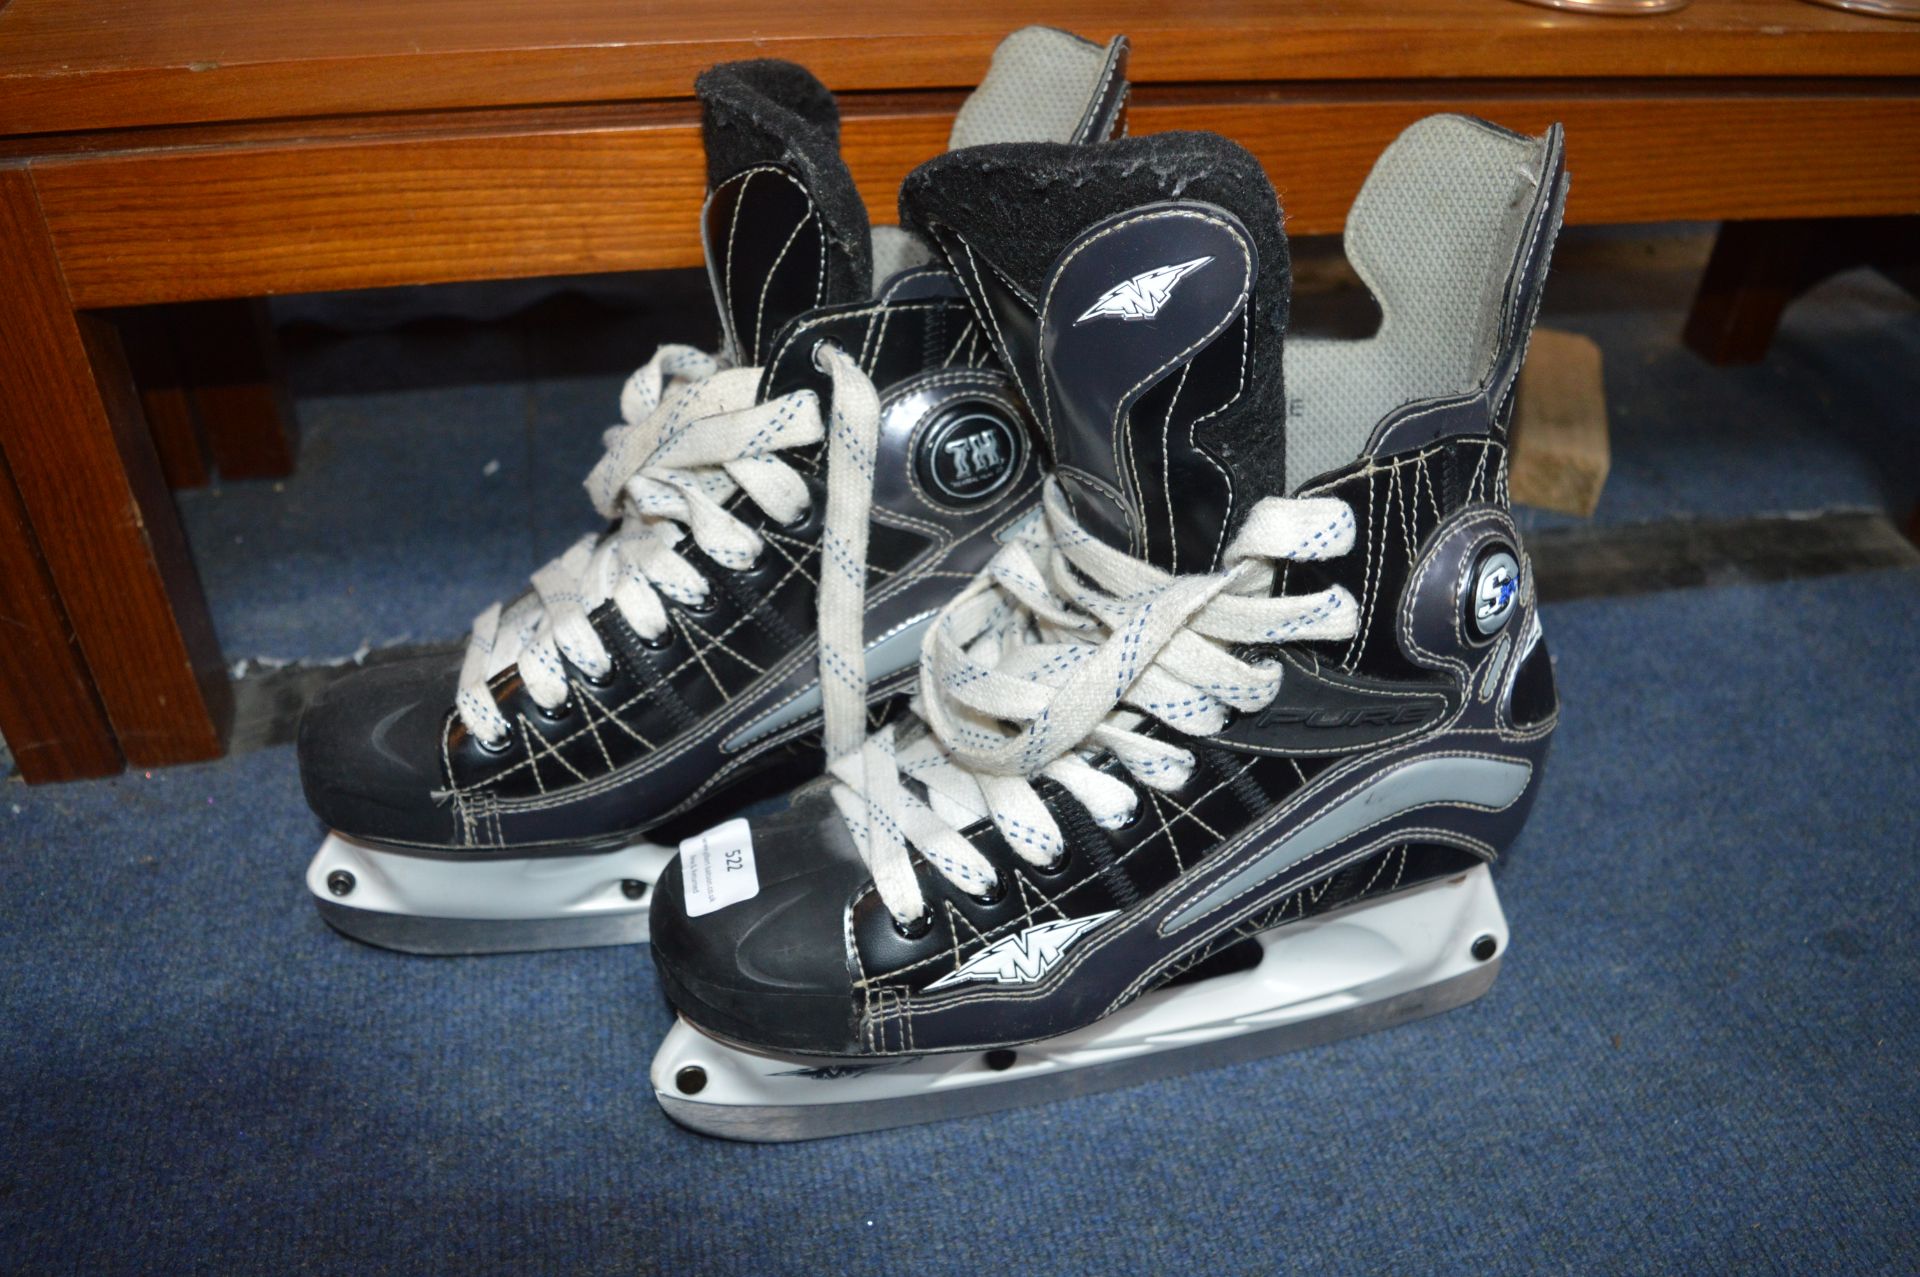 Pair of Mission Pure Ice Skates Size: 43